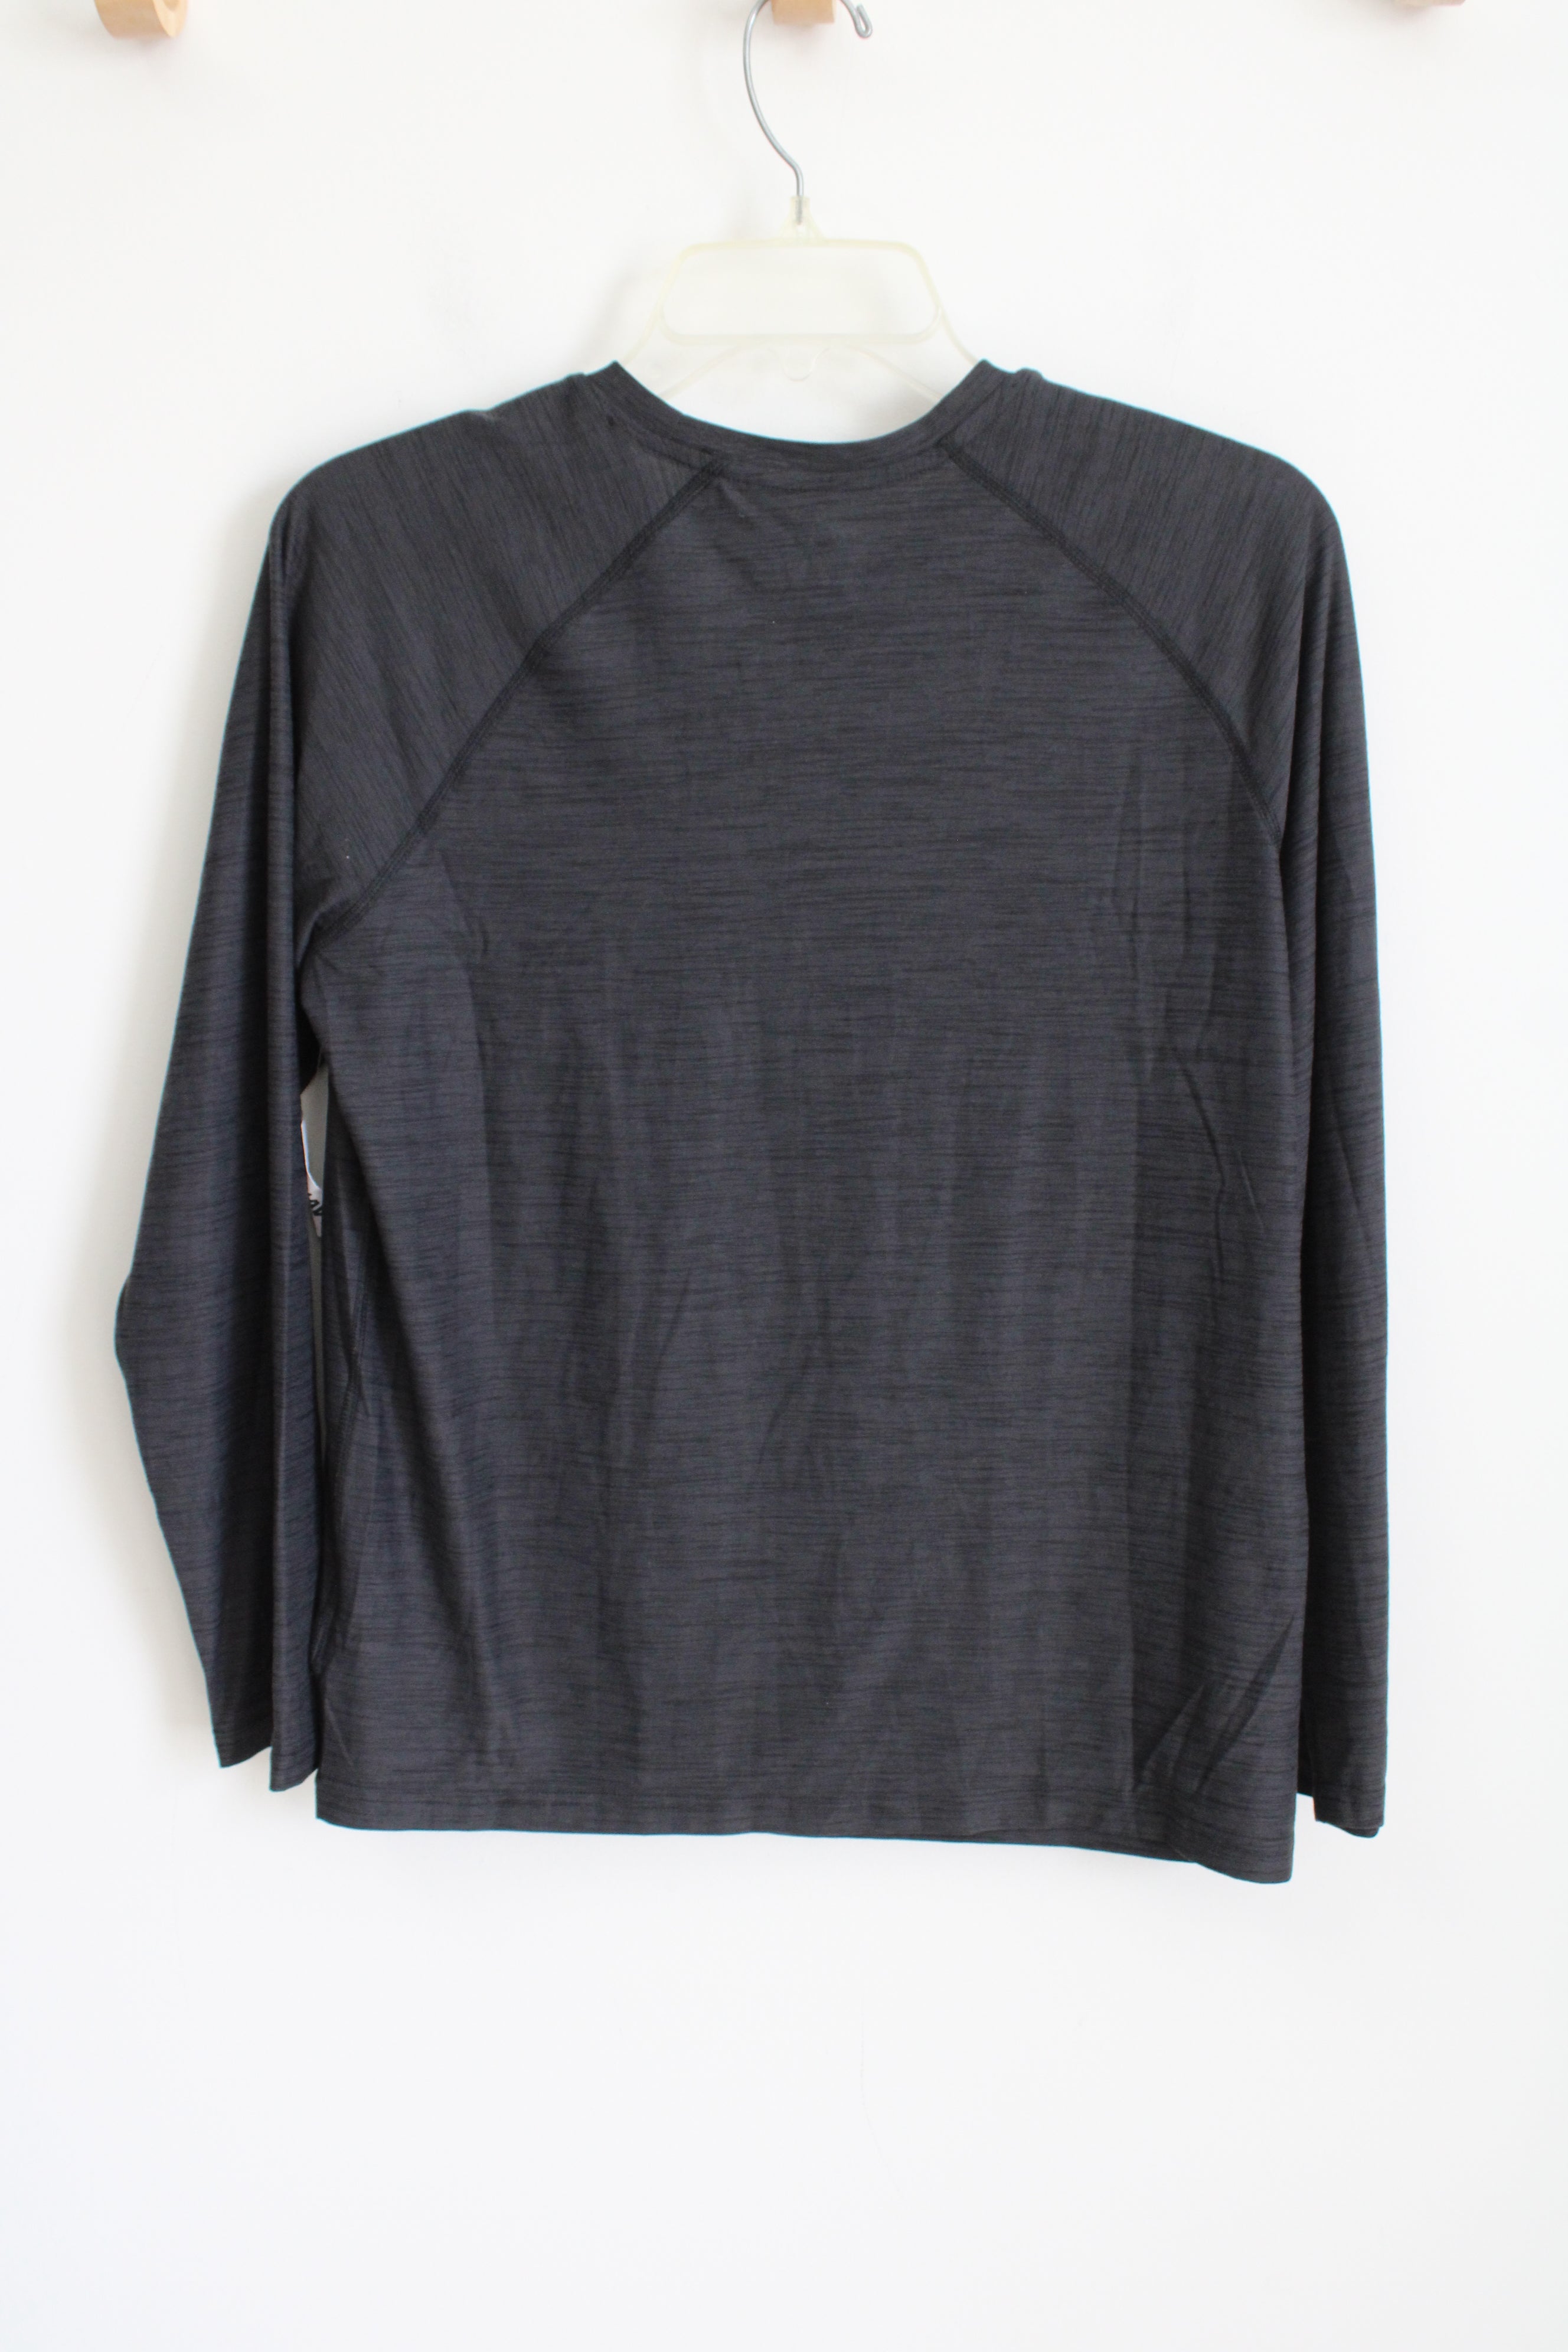 Old Navy Active Breathe On Gray Top | XL